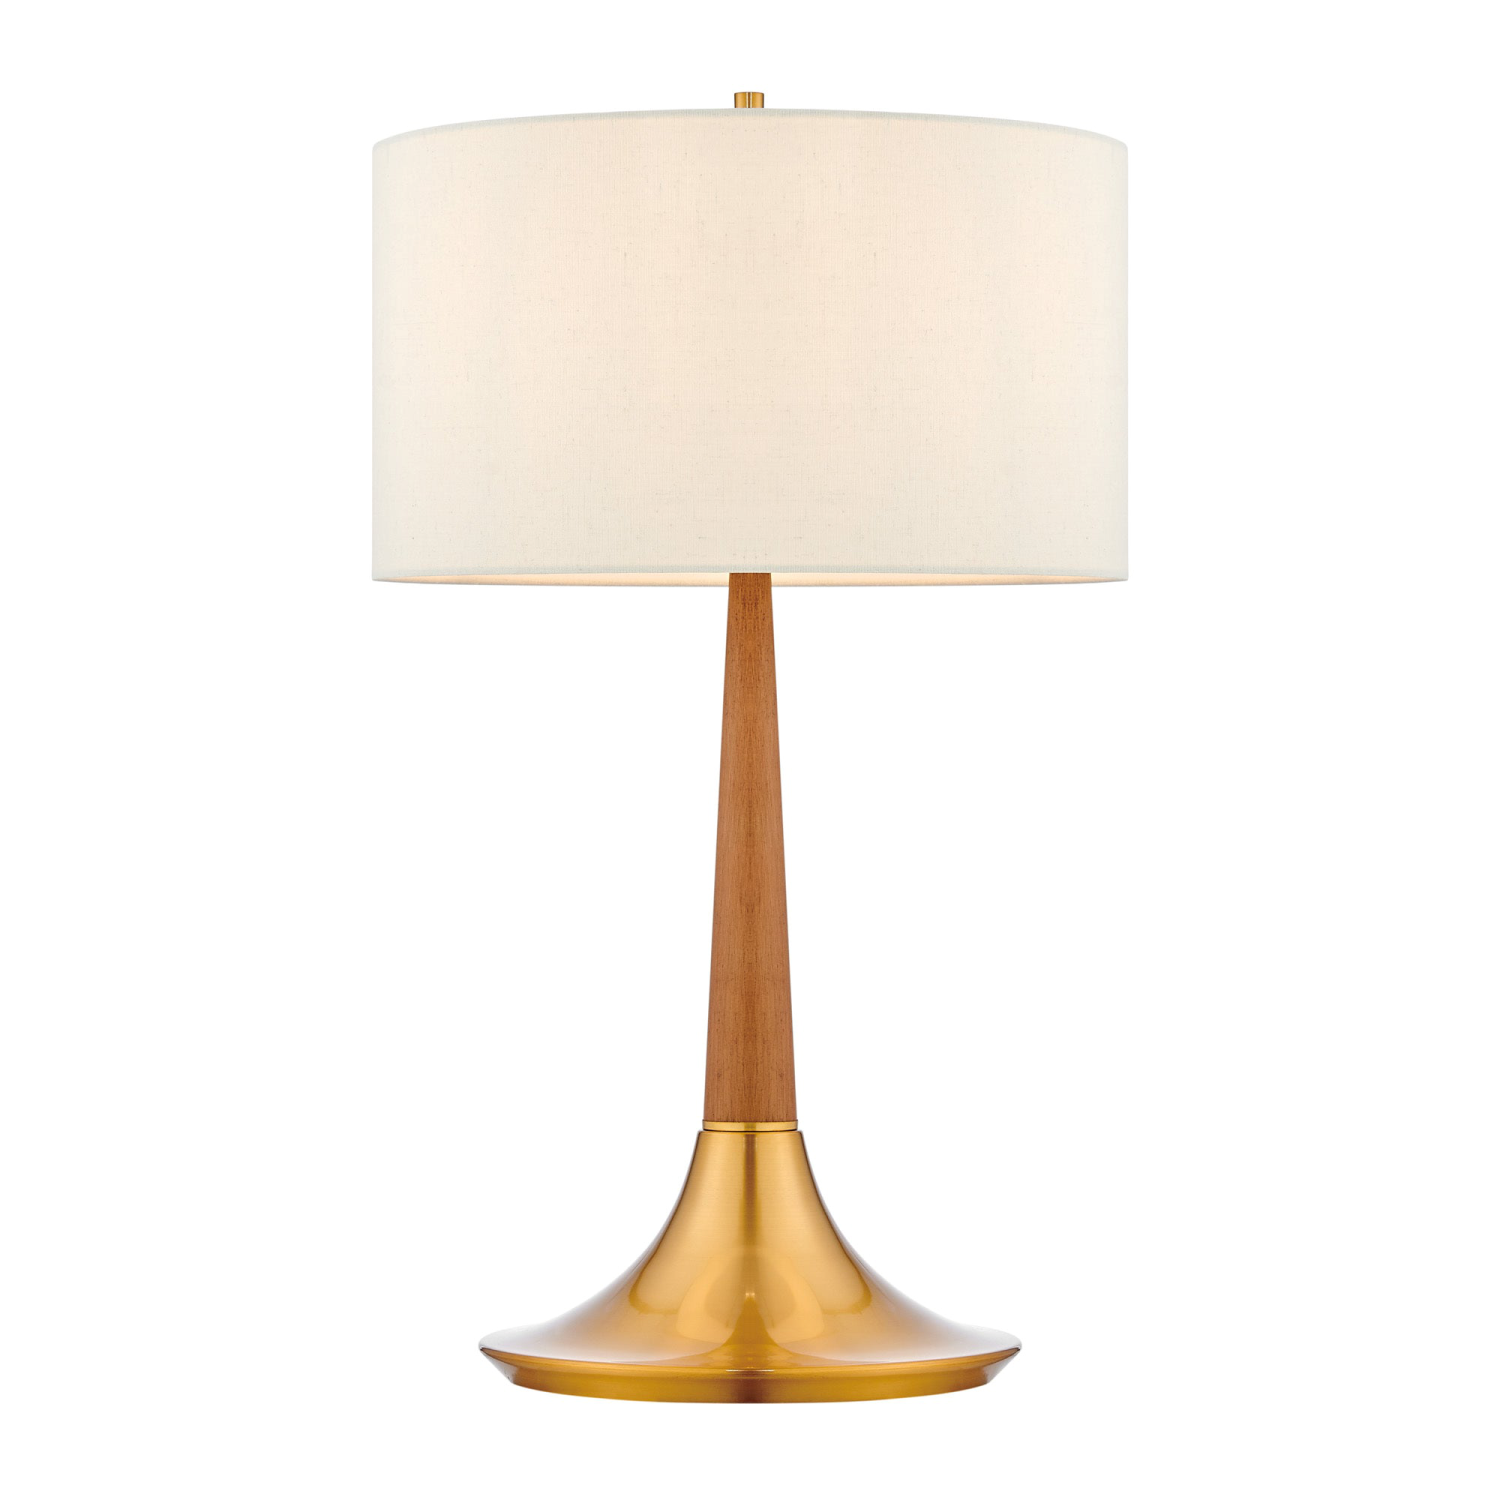 Portillo Table Lamp Picture with White Background